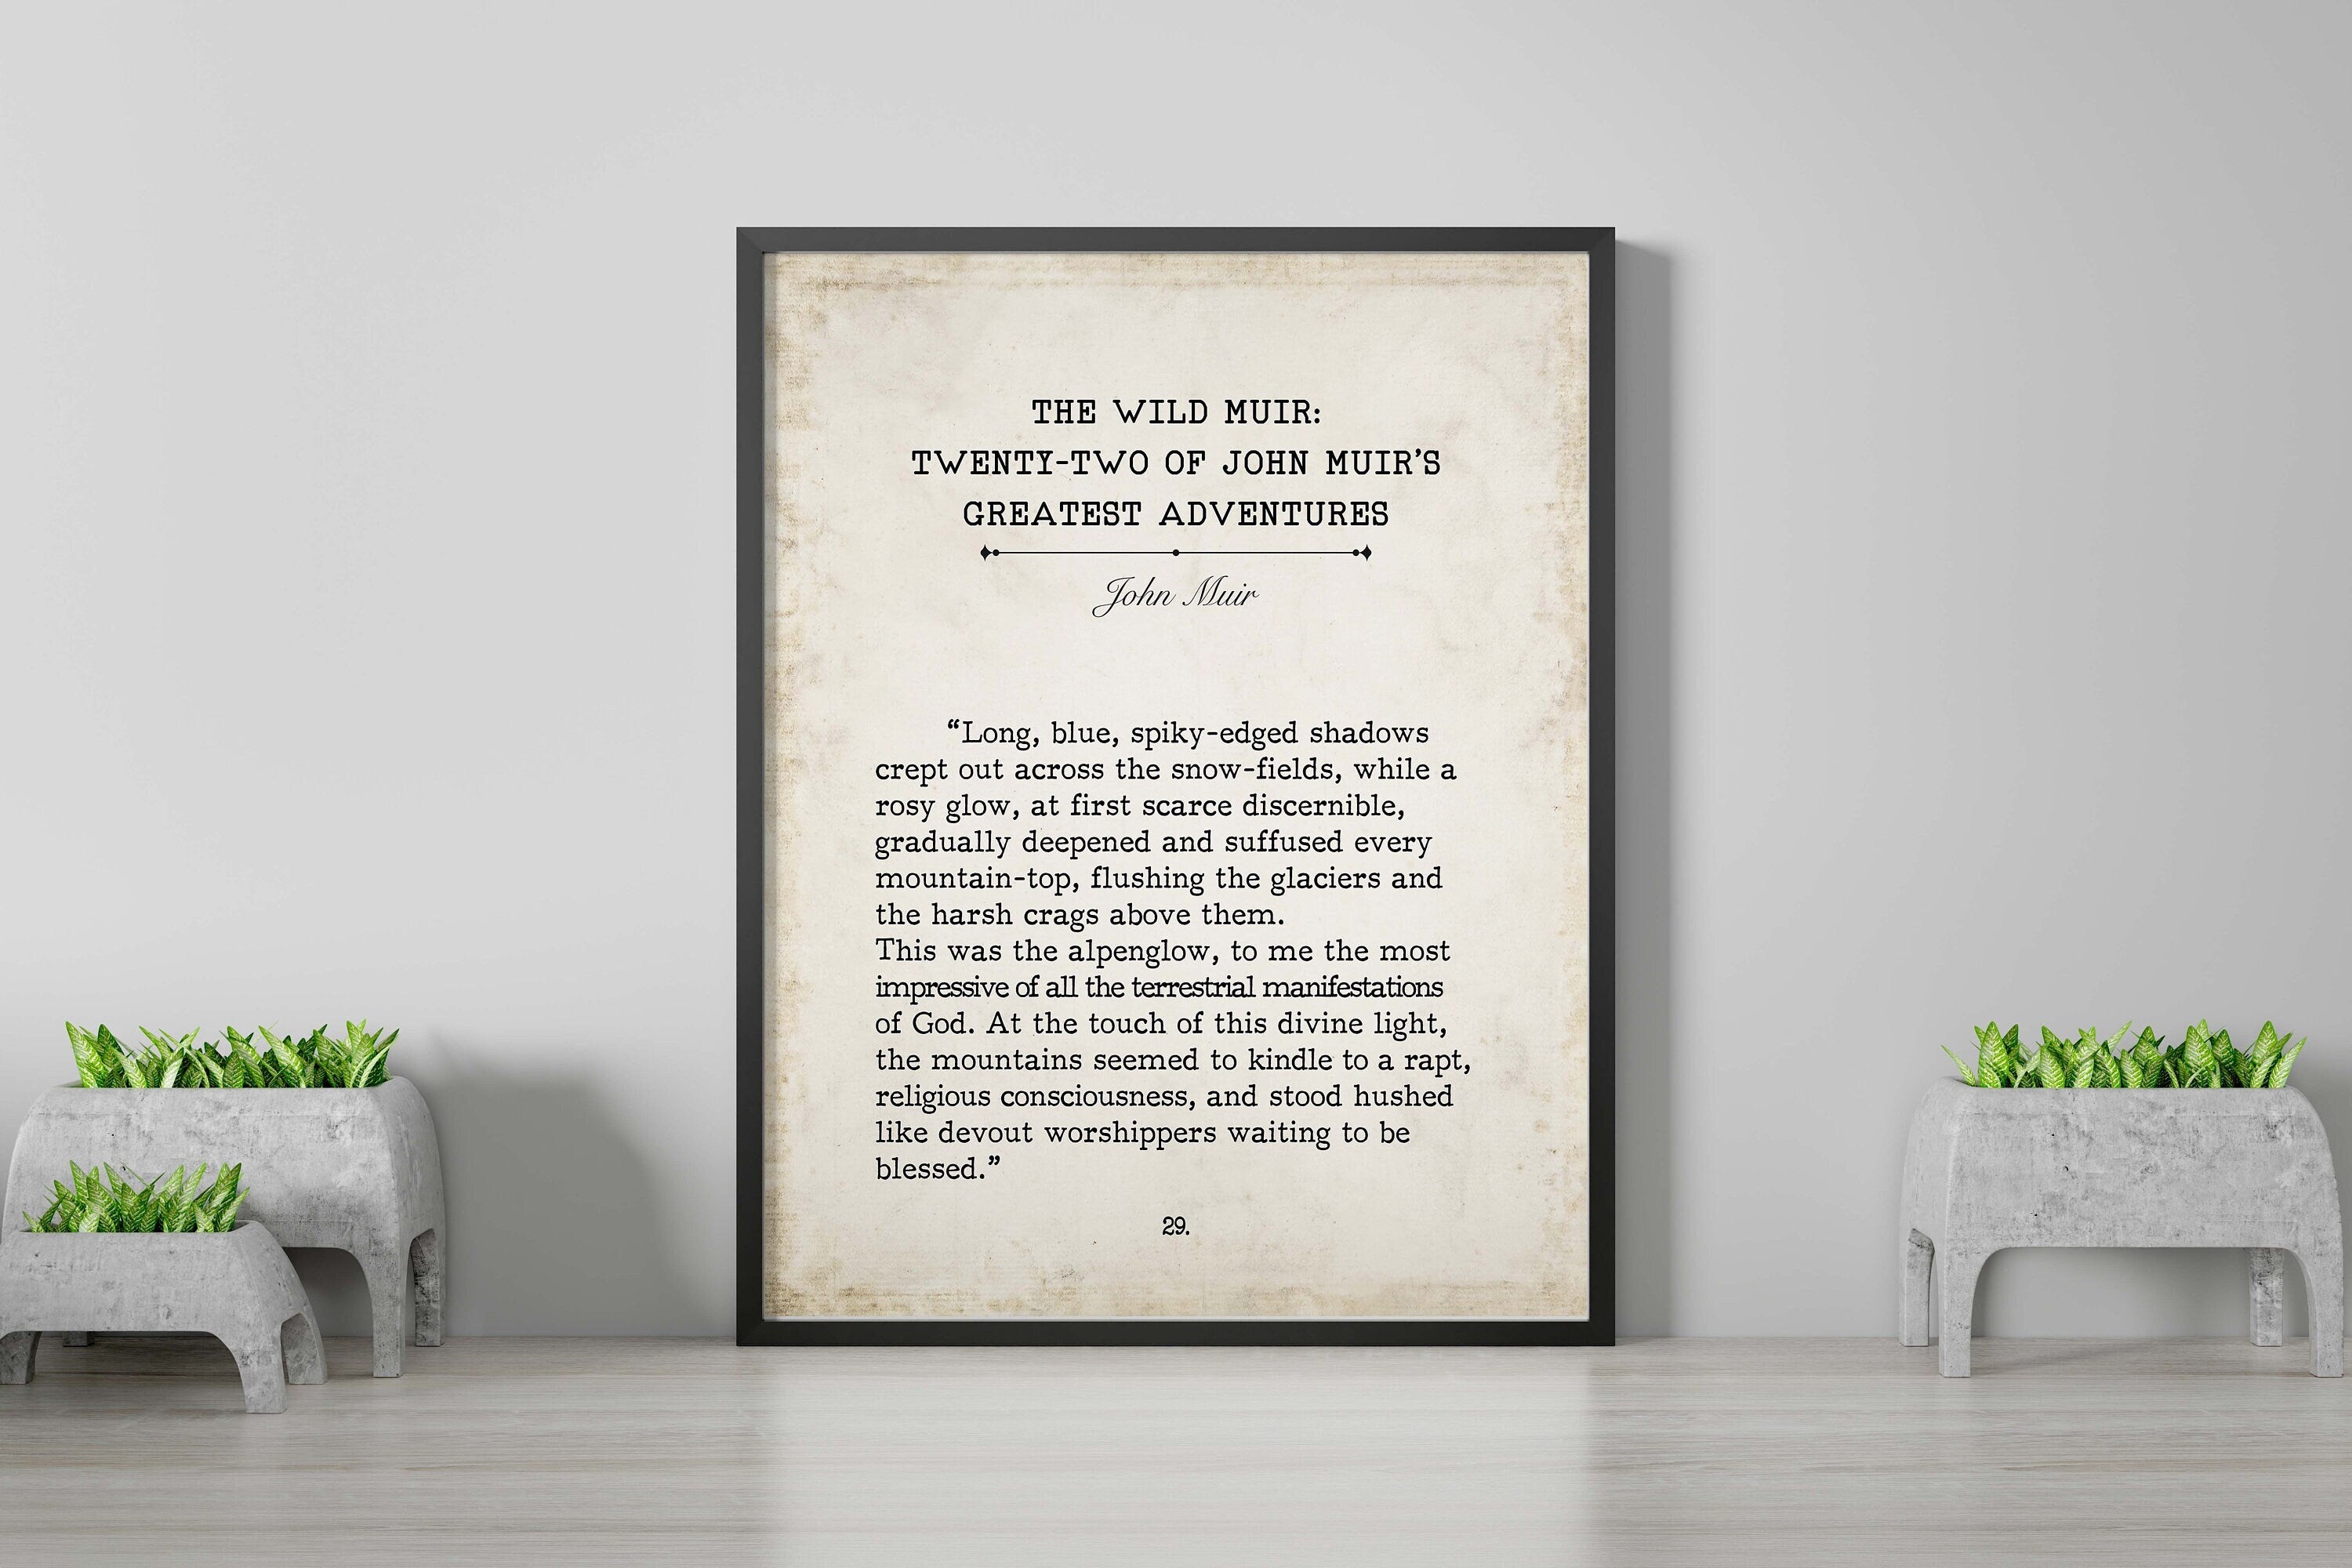 John Muir Book Page Inspirational Wall Art, John Muir's Greatest Adventures Quote Vintage Style Print Wall Decor